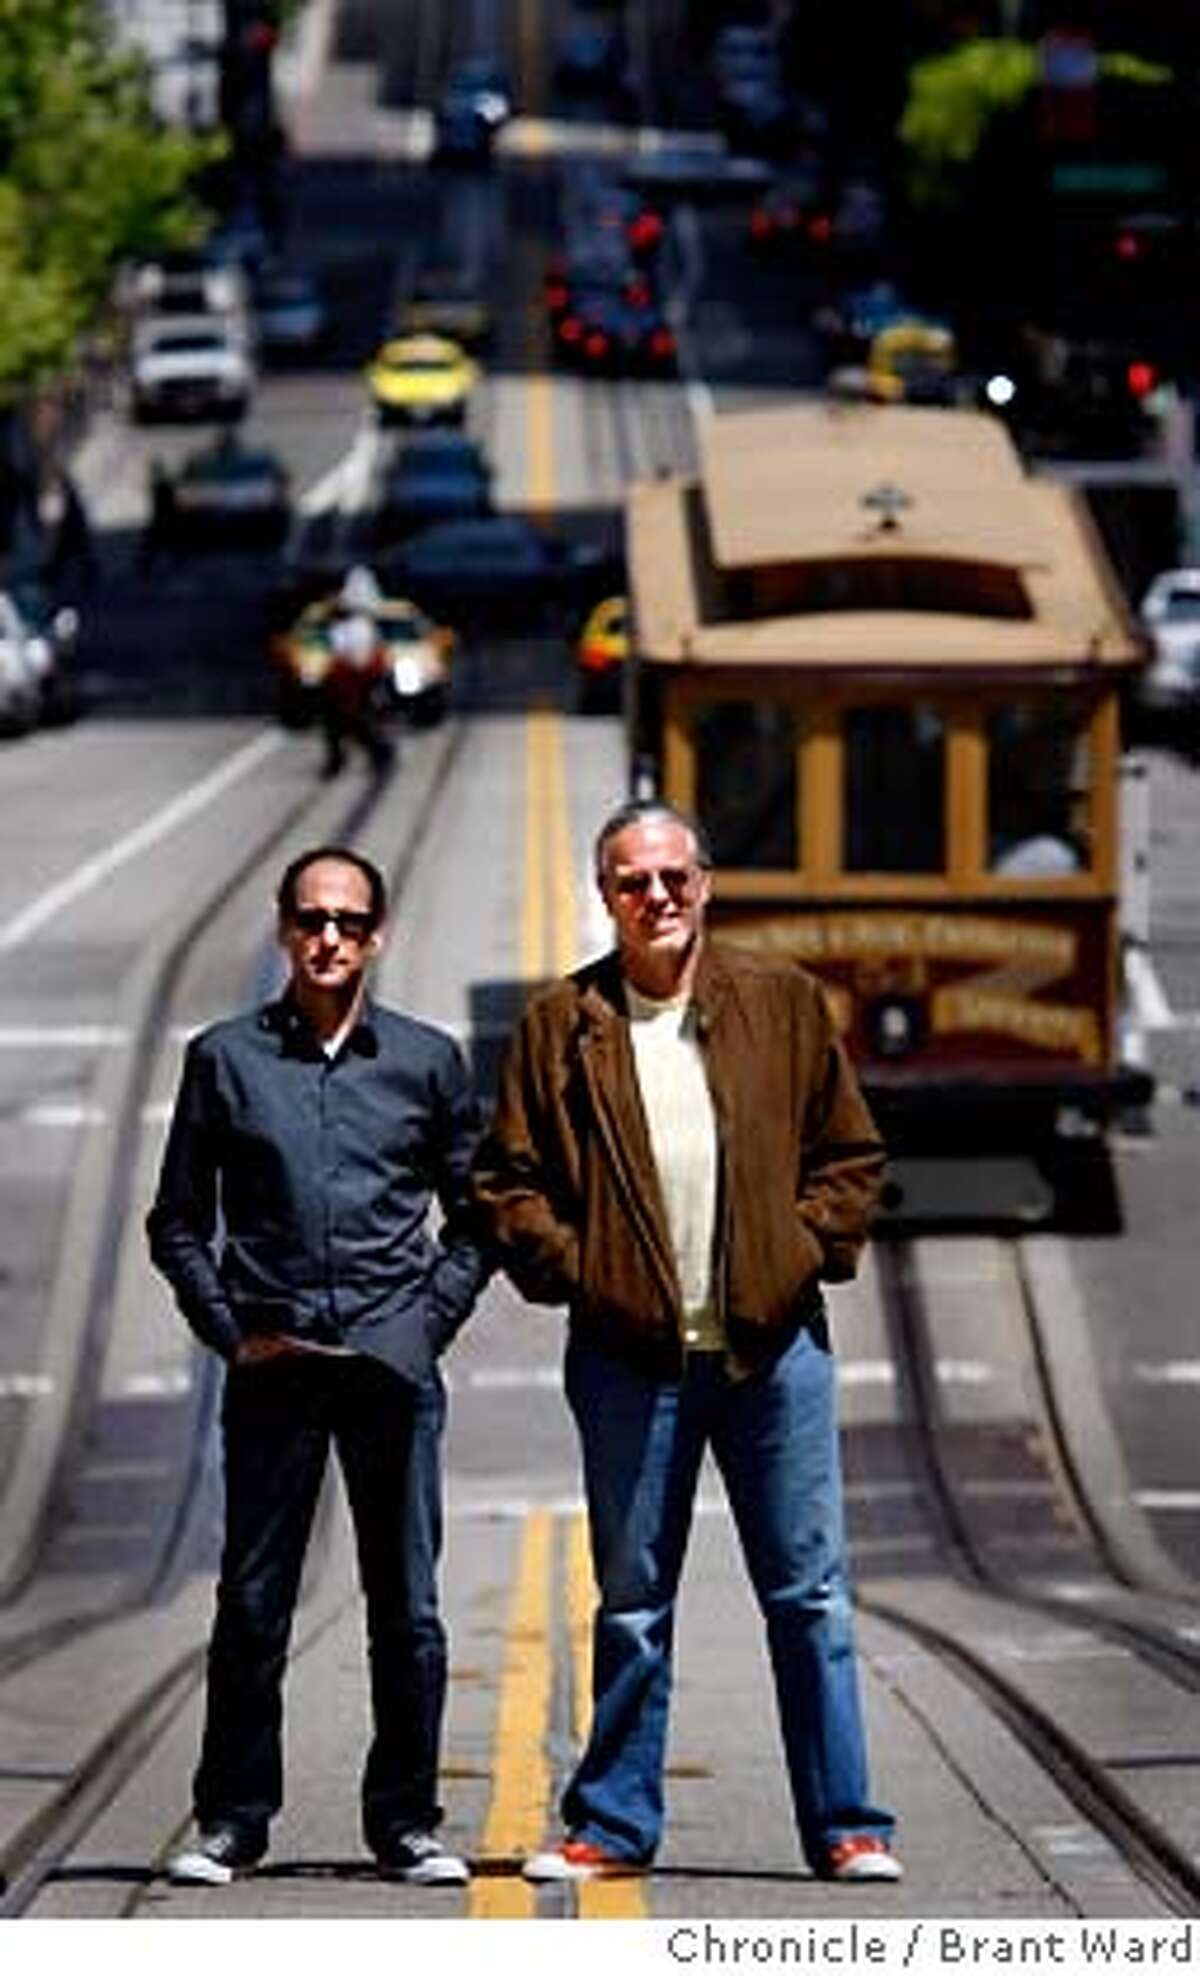 ###Live Caption:Rich Silverstein, left, and Jeff Goodby outside their California Street agency in San Francisco. Goodby, Silverstein & Partners, the San Francisco-based advertising agency is celebrating 25 years in town Wednesday, May 7, 2008. Photo by Brant Ward / The Chronicle###Caption History:Rich Silverstein, left, and Jeff Goodby outside their California Street agency in San Francisco. Goodby, Silverstein & Partners, the San Francisco-based advertising agency is celebrating 25 years in town Wednesday, May 7, 2008. Photo by Brant Ward / The Chronicle###Notes:###Special Instructions: